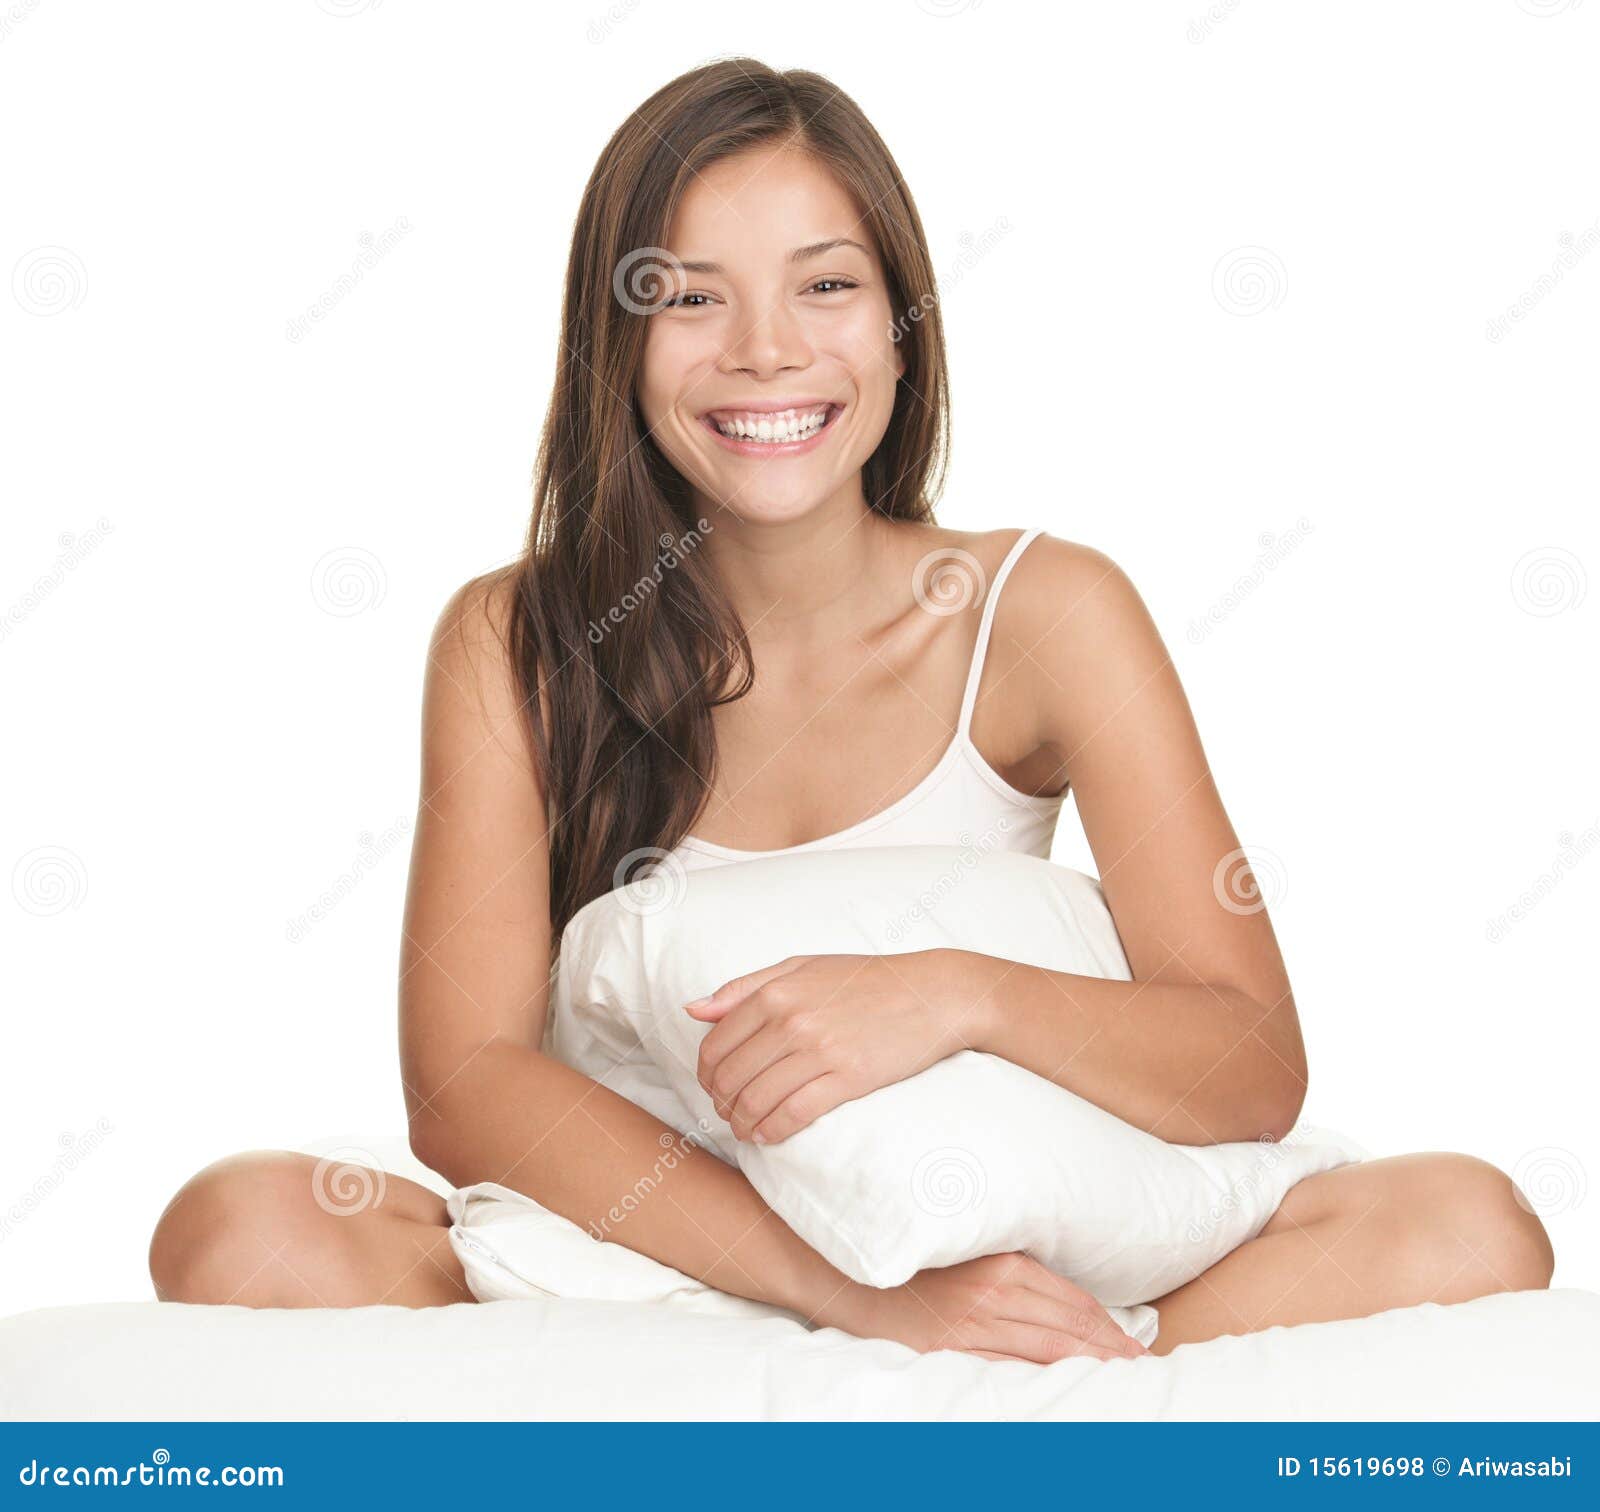 Woman with vitiligo holding pillow between legs on bed in front of